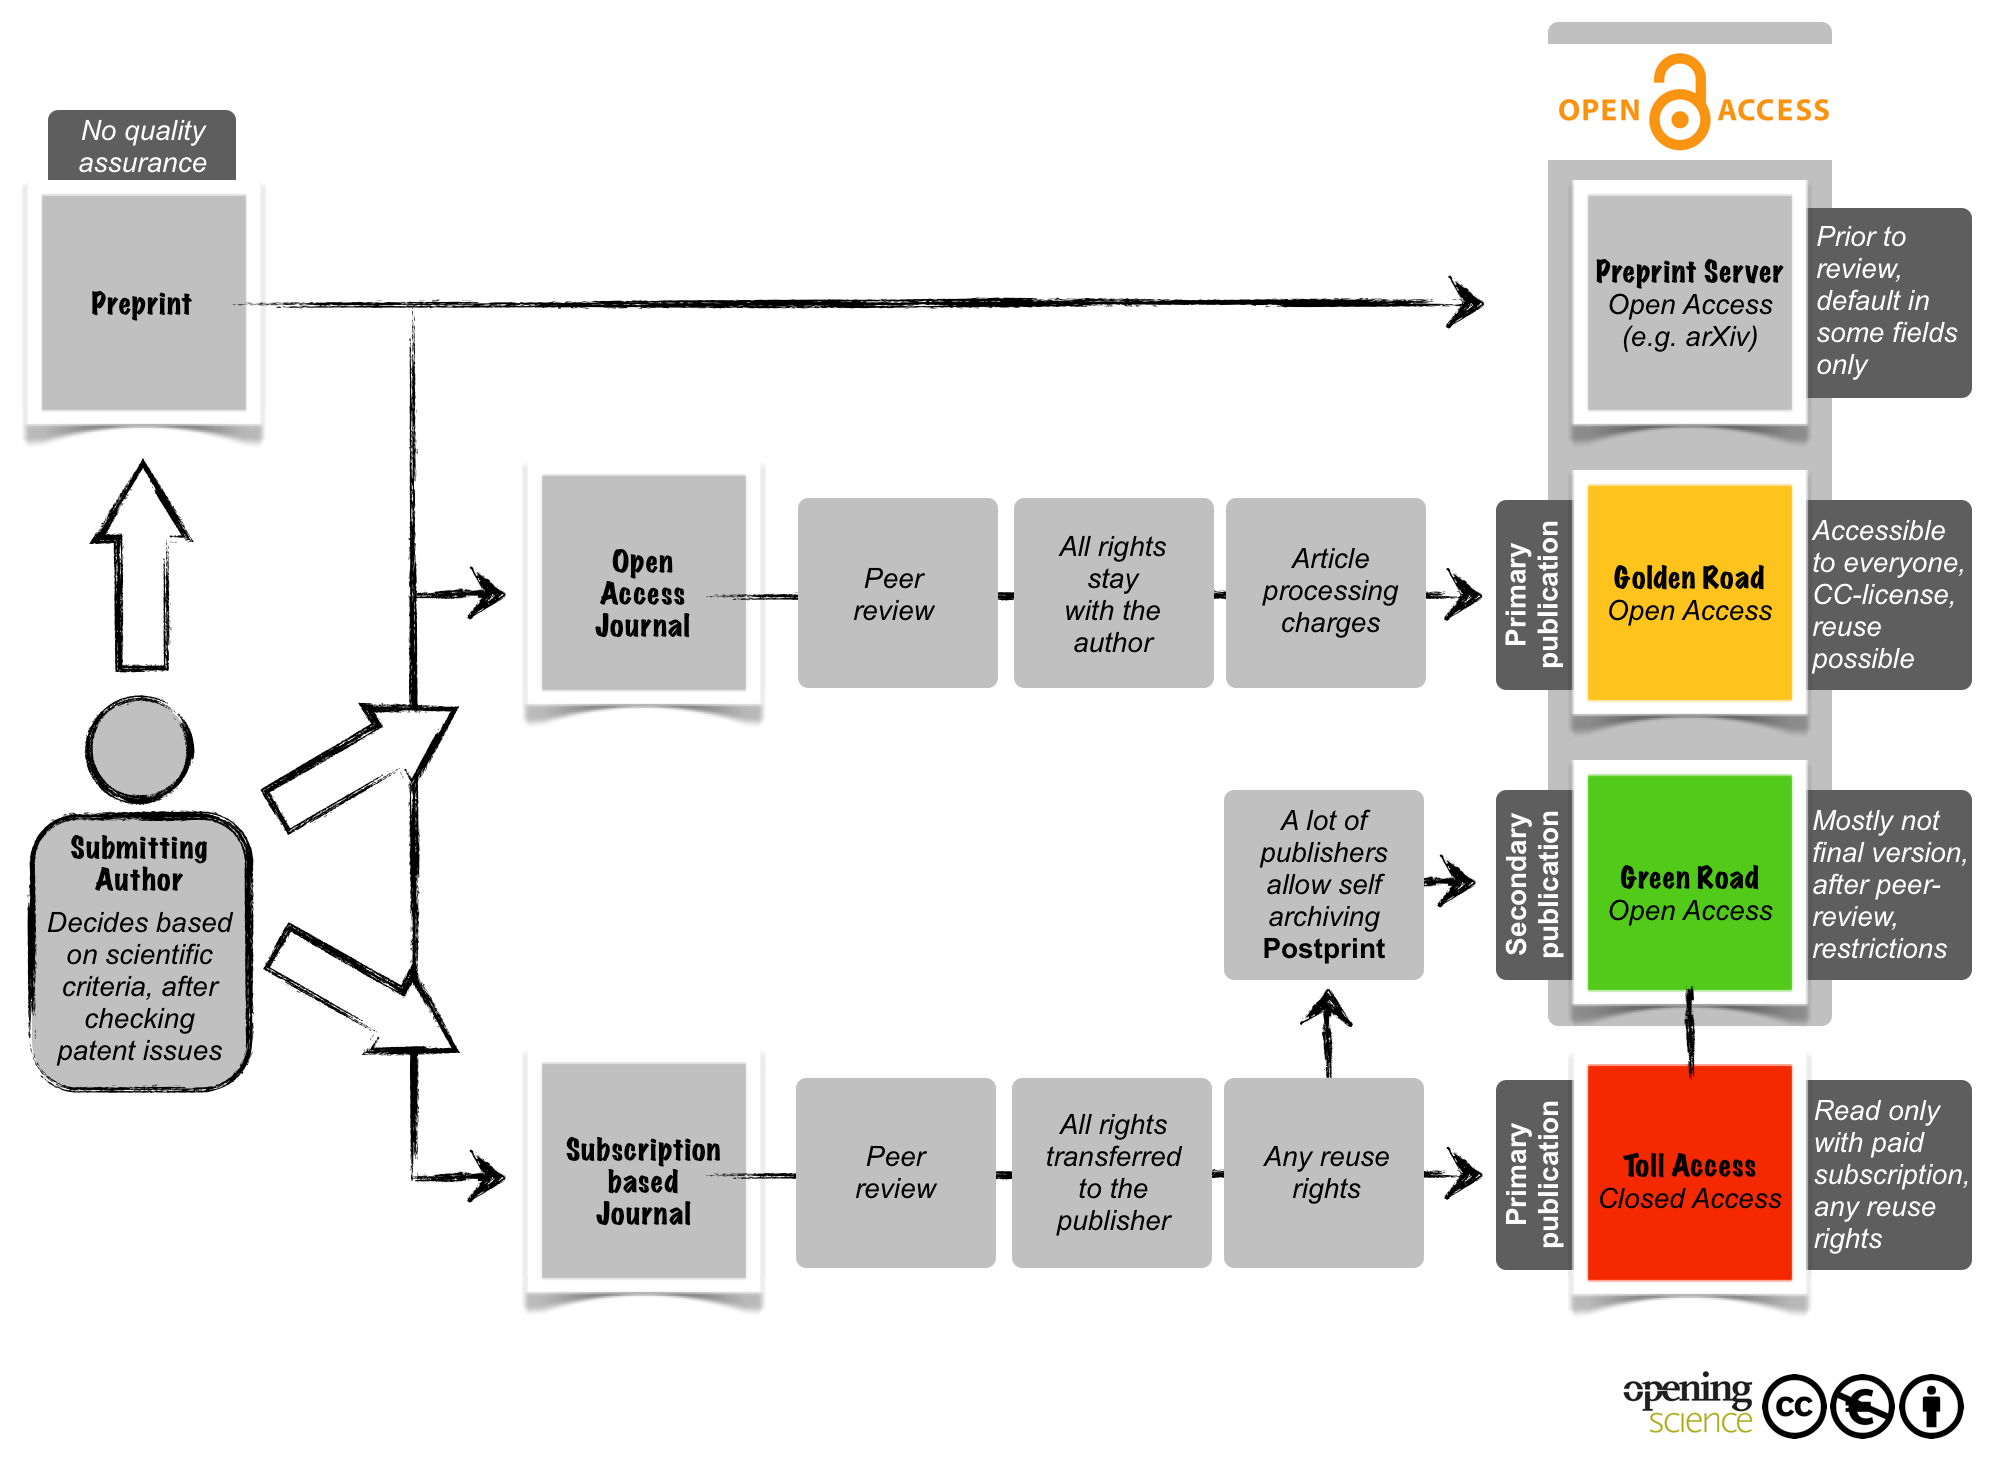 Figure 1. The Open Access process, an overview.